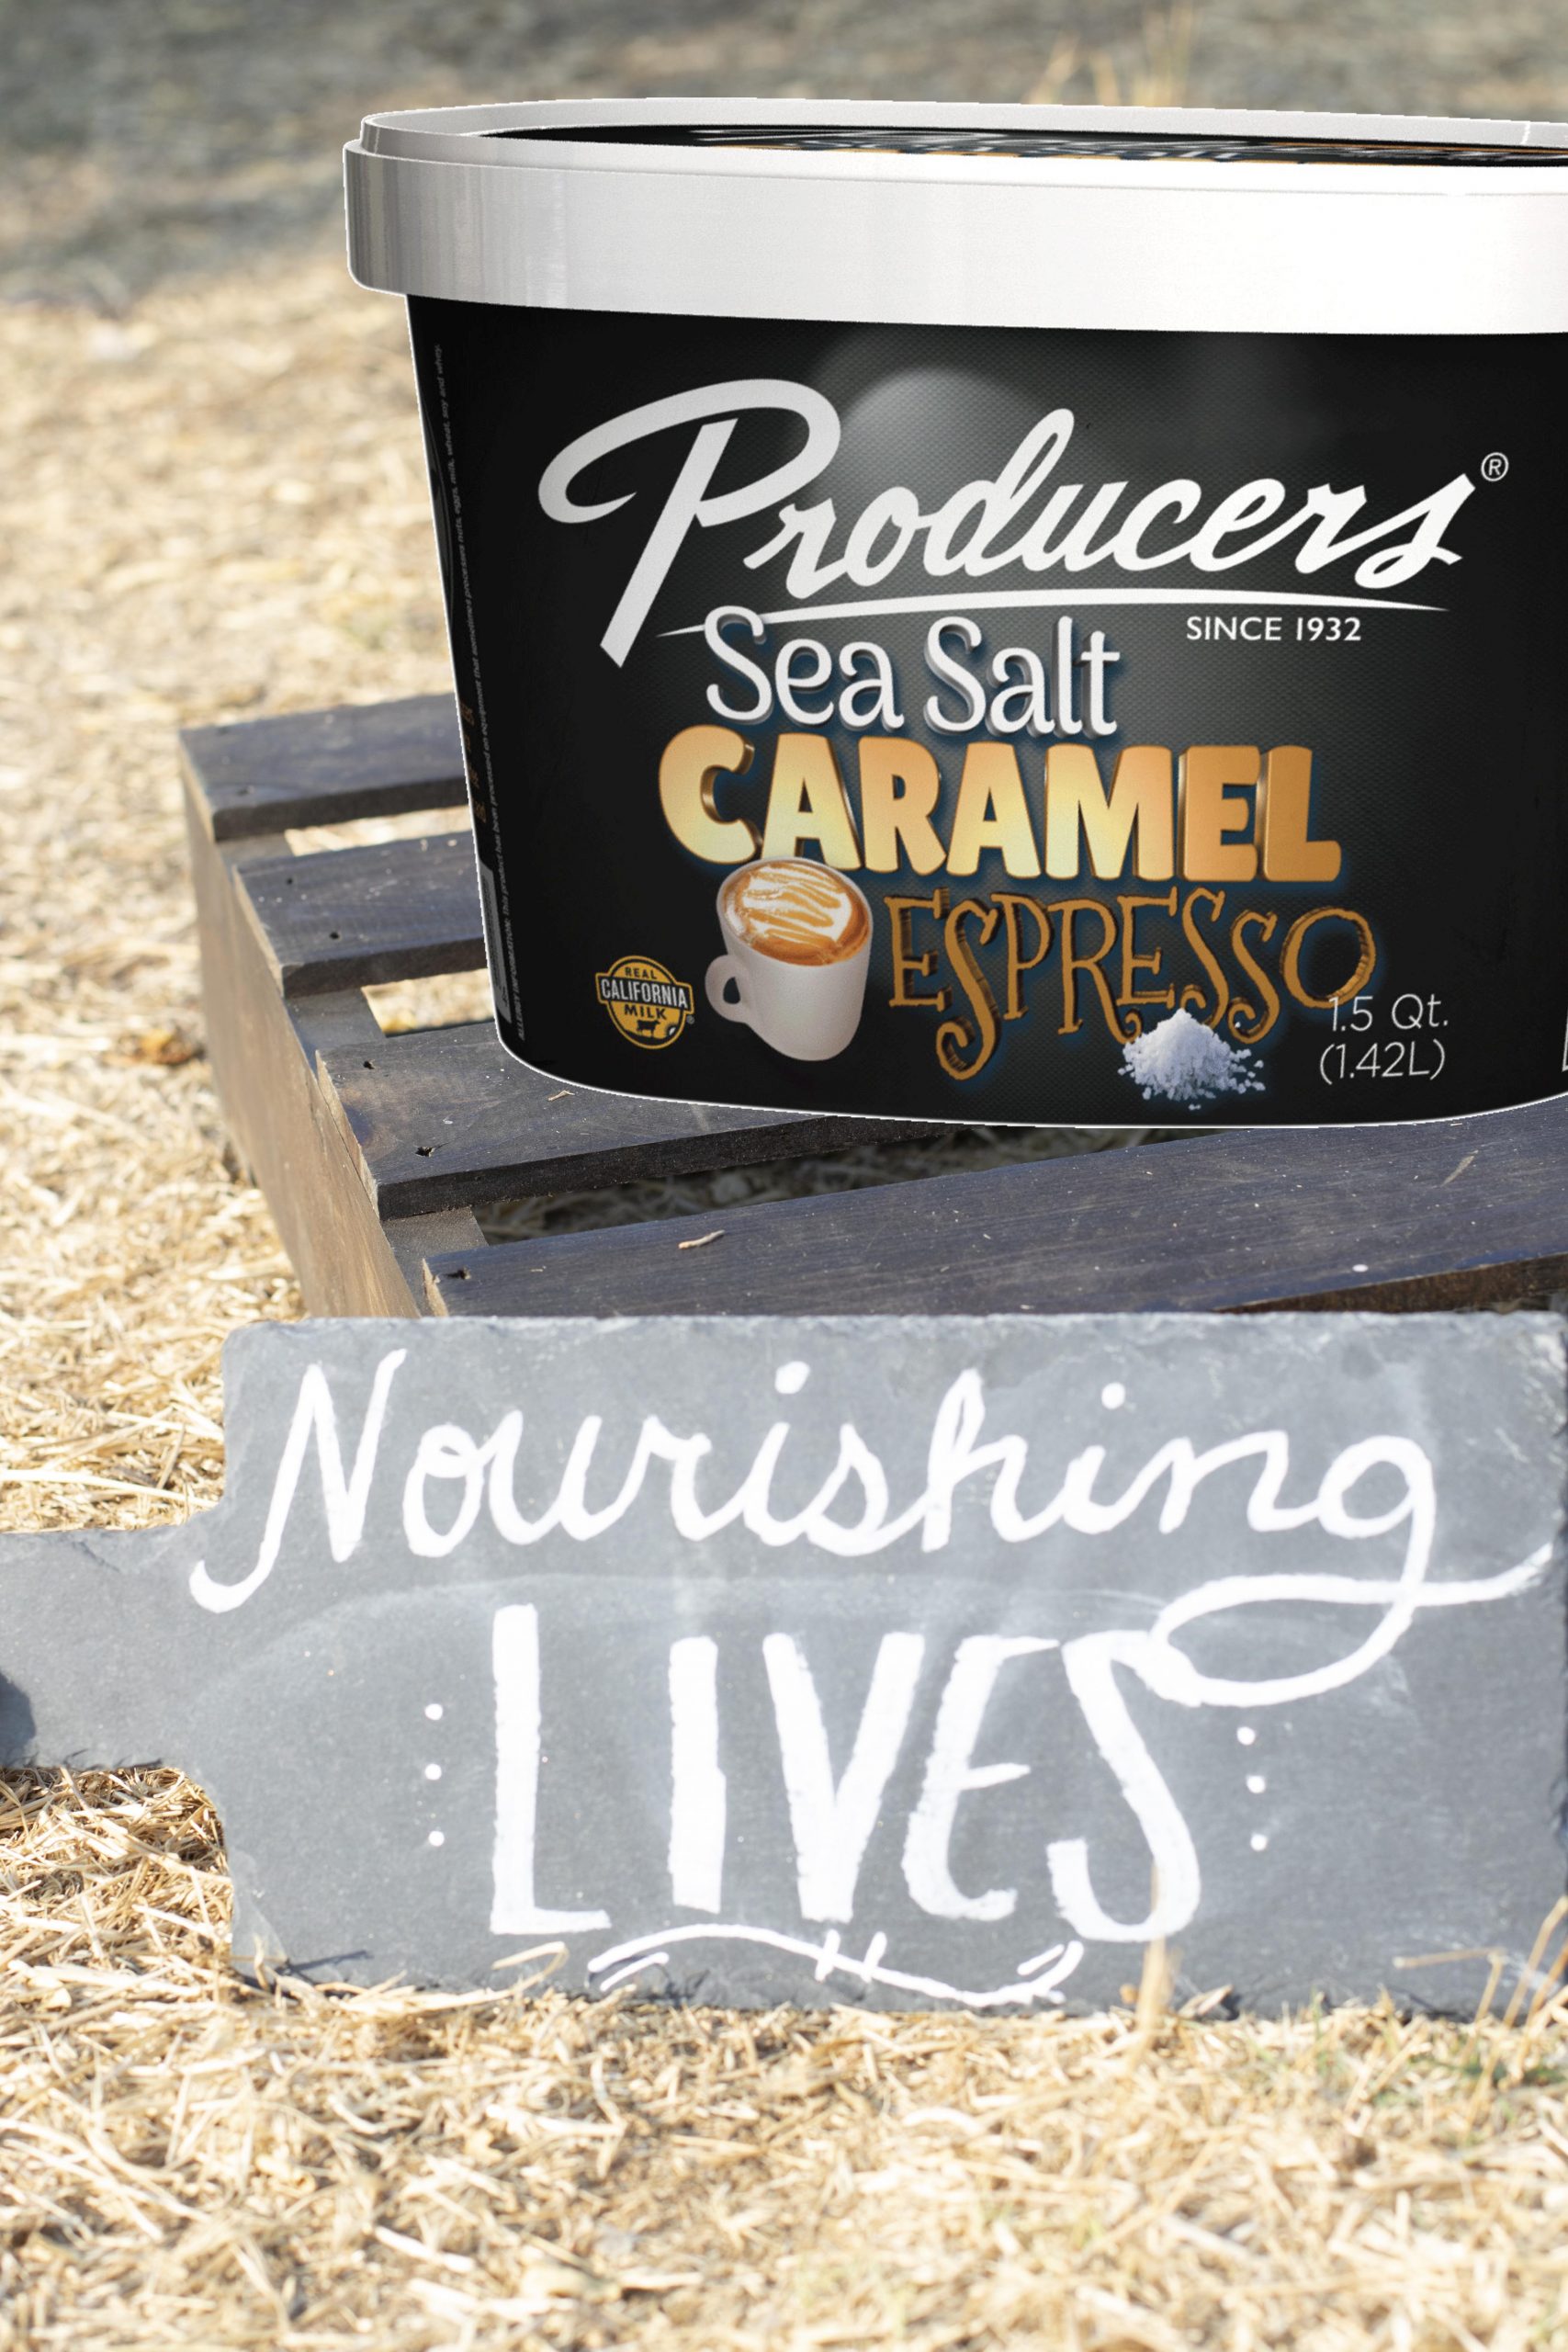 Sea Salt Caramel Espresso Producers Ice Cream sitting on wood in the middle of a hay field.